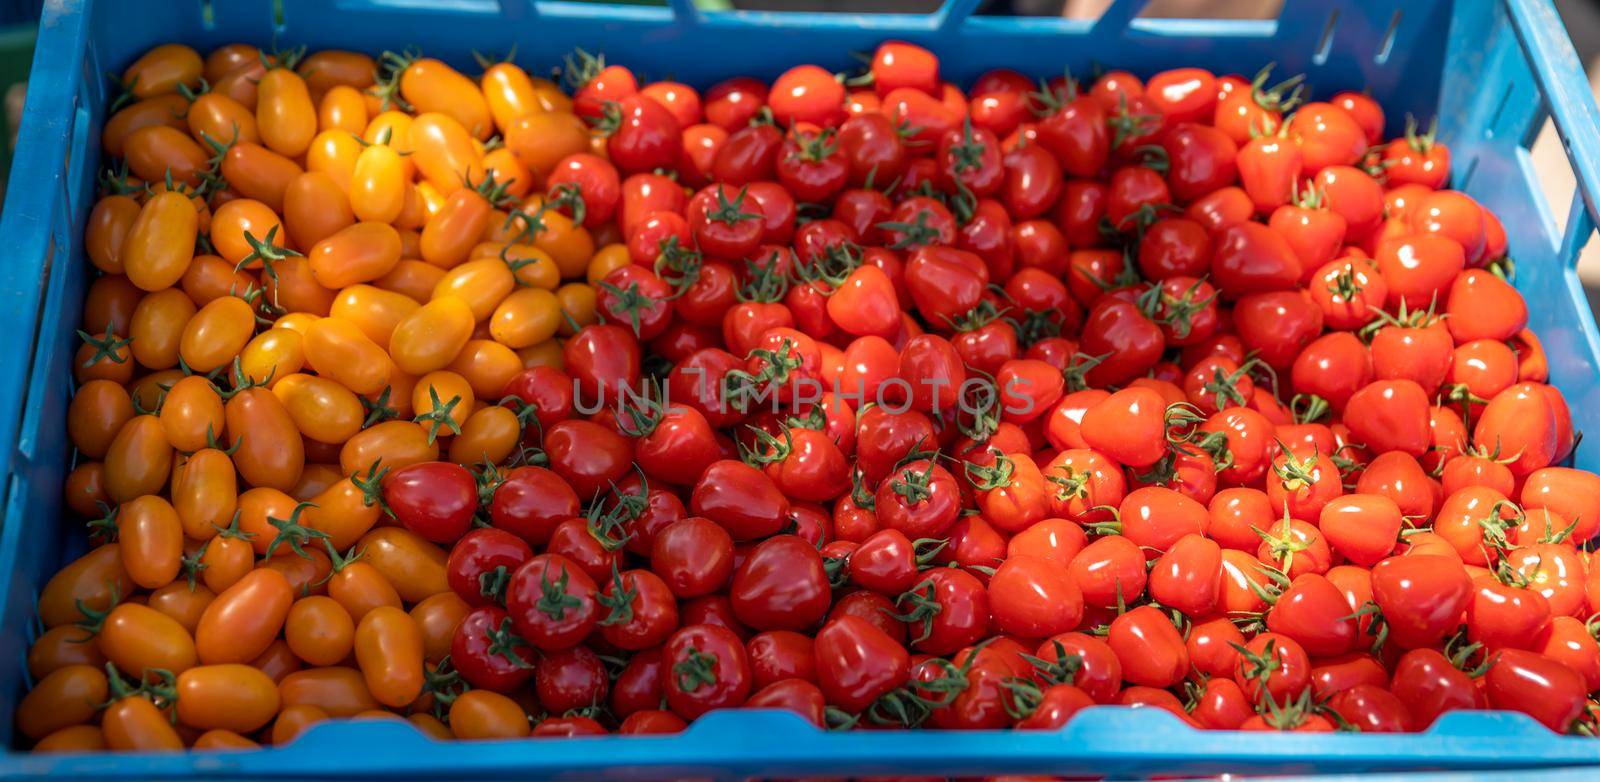 freshly picked red tomatoes in a crate by Edophoto